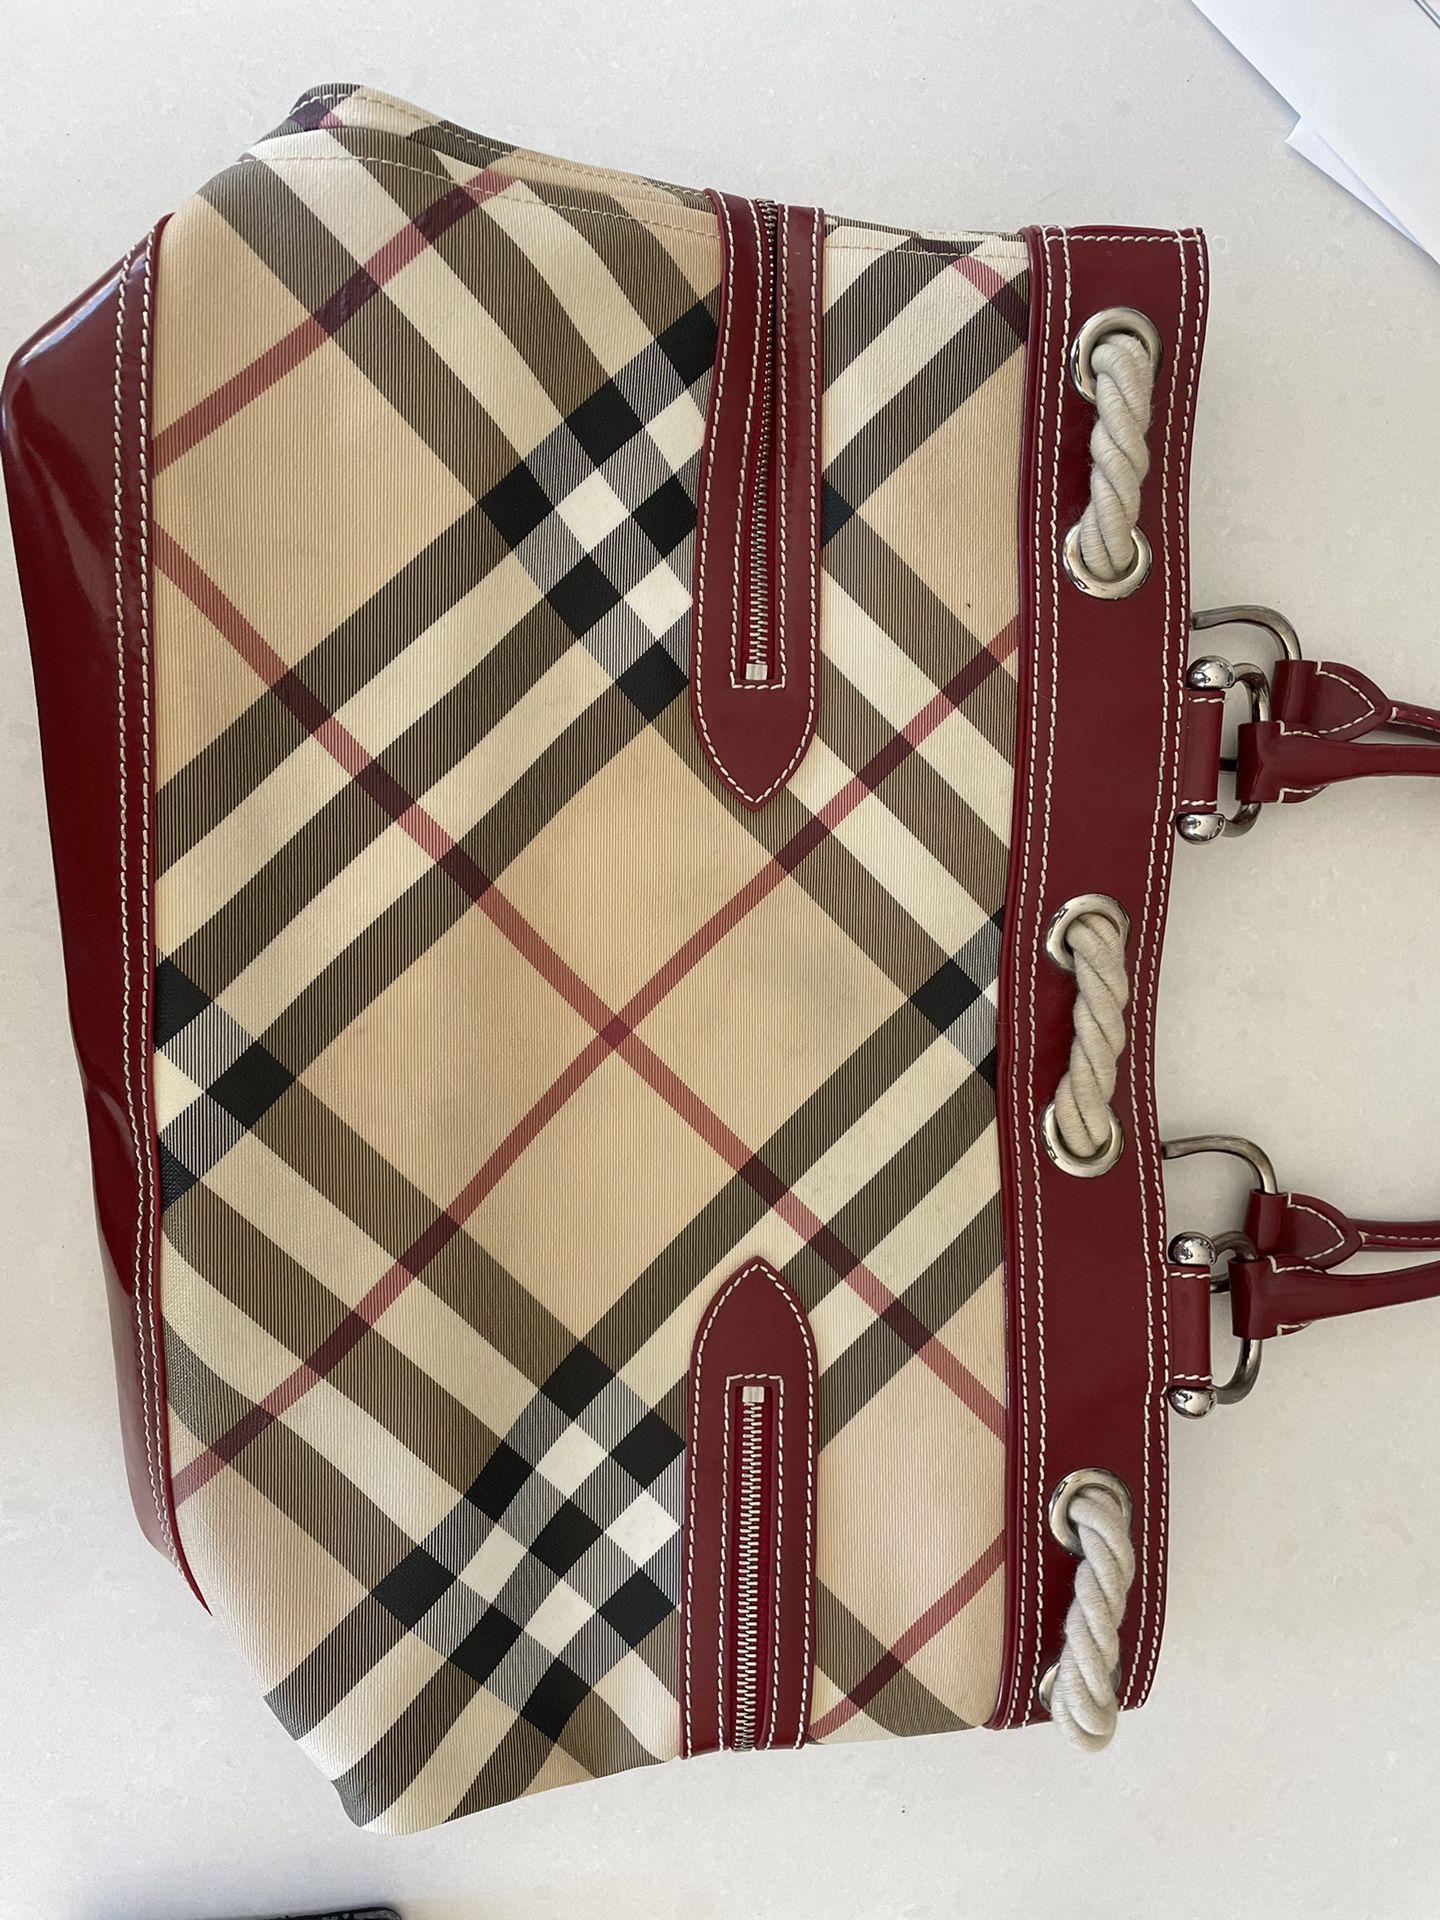 RARE Burberry Bag, Red & Plaid Color Slightly Used Great Deal